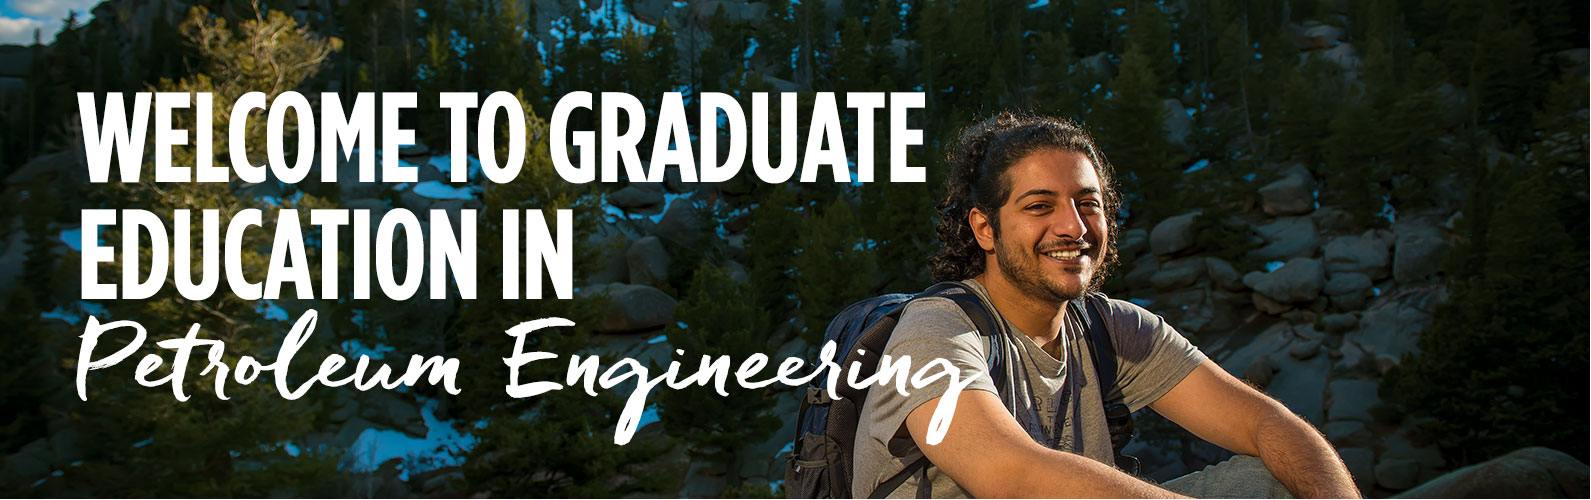 Welcome to Graduate Education in Petroleum Engineering